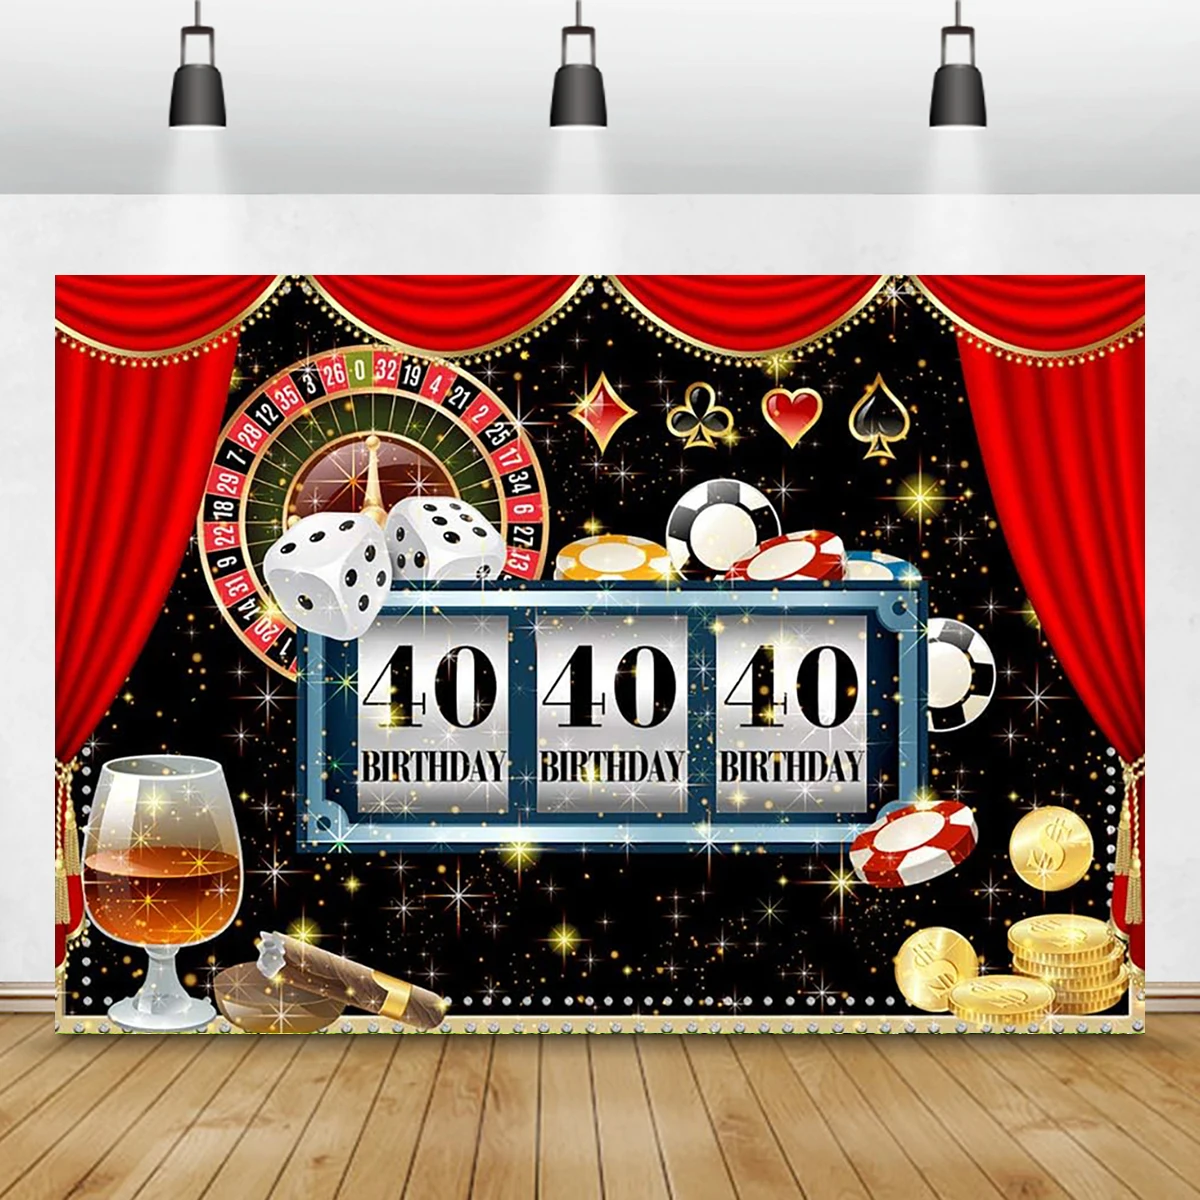 Las Vegas Casino Backdrop for Party Photography Poker Chip Turntable Photography YouTube Background Photo Video Props Decoration